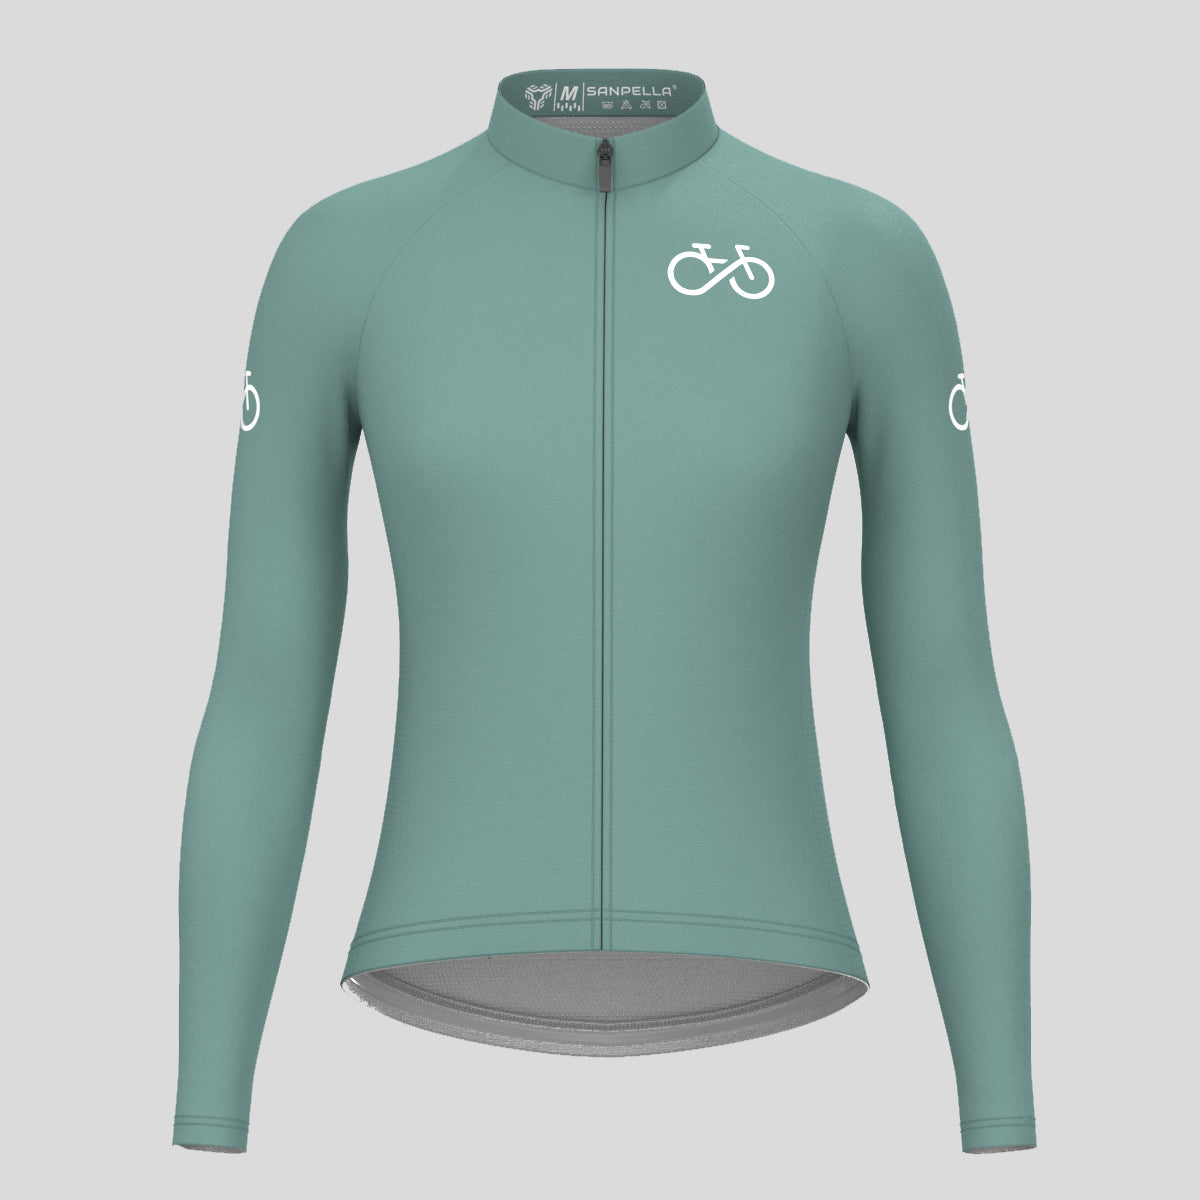 Ride Forever Women's LS Cycling Jersey - Sage